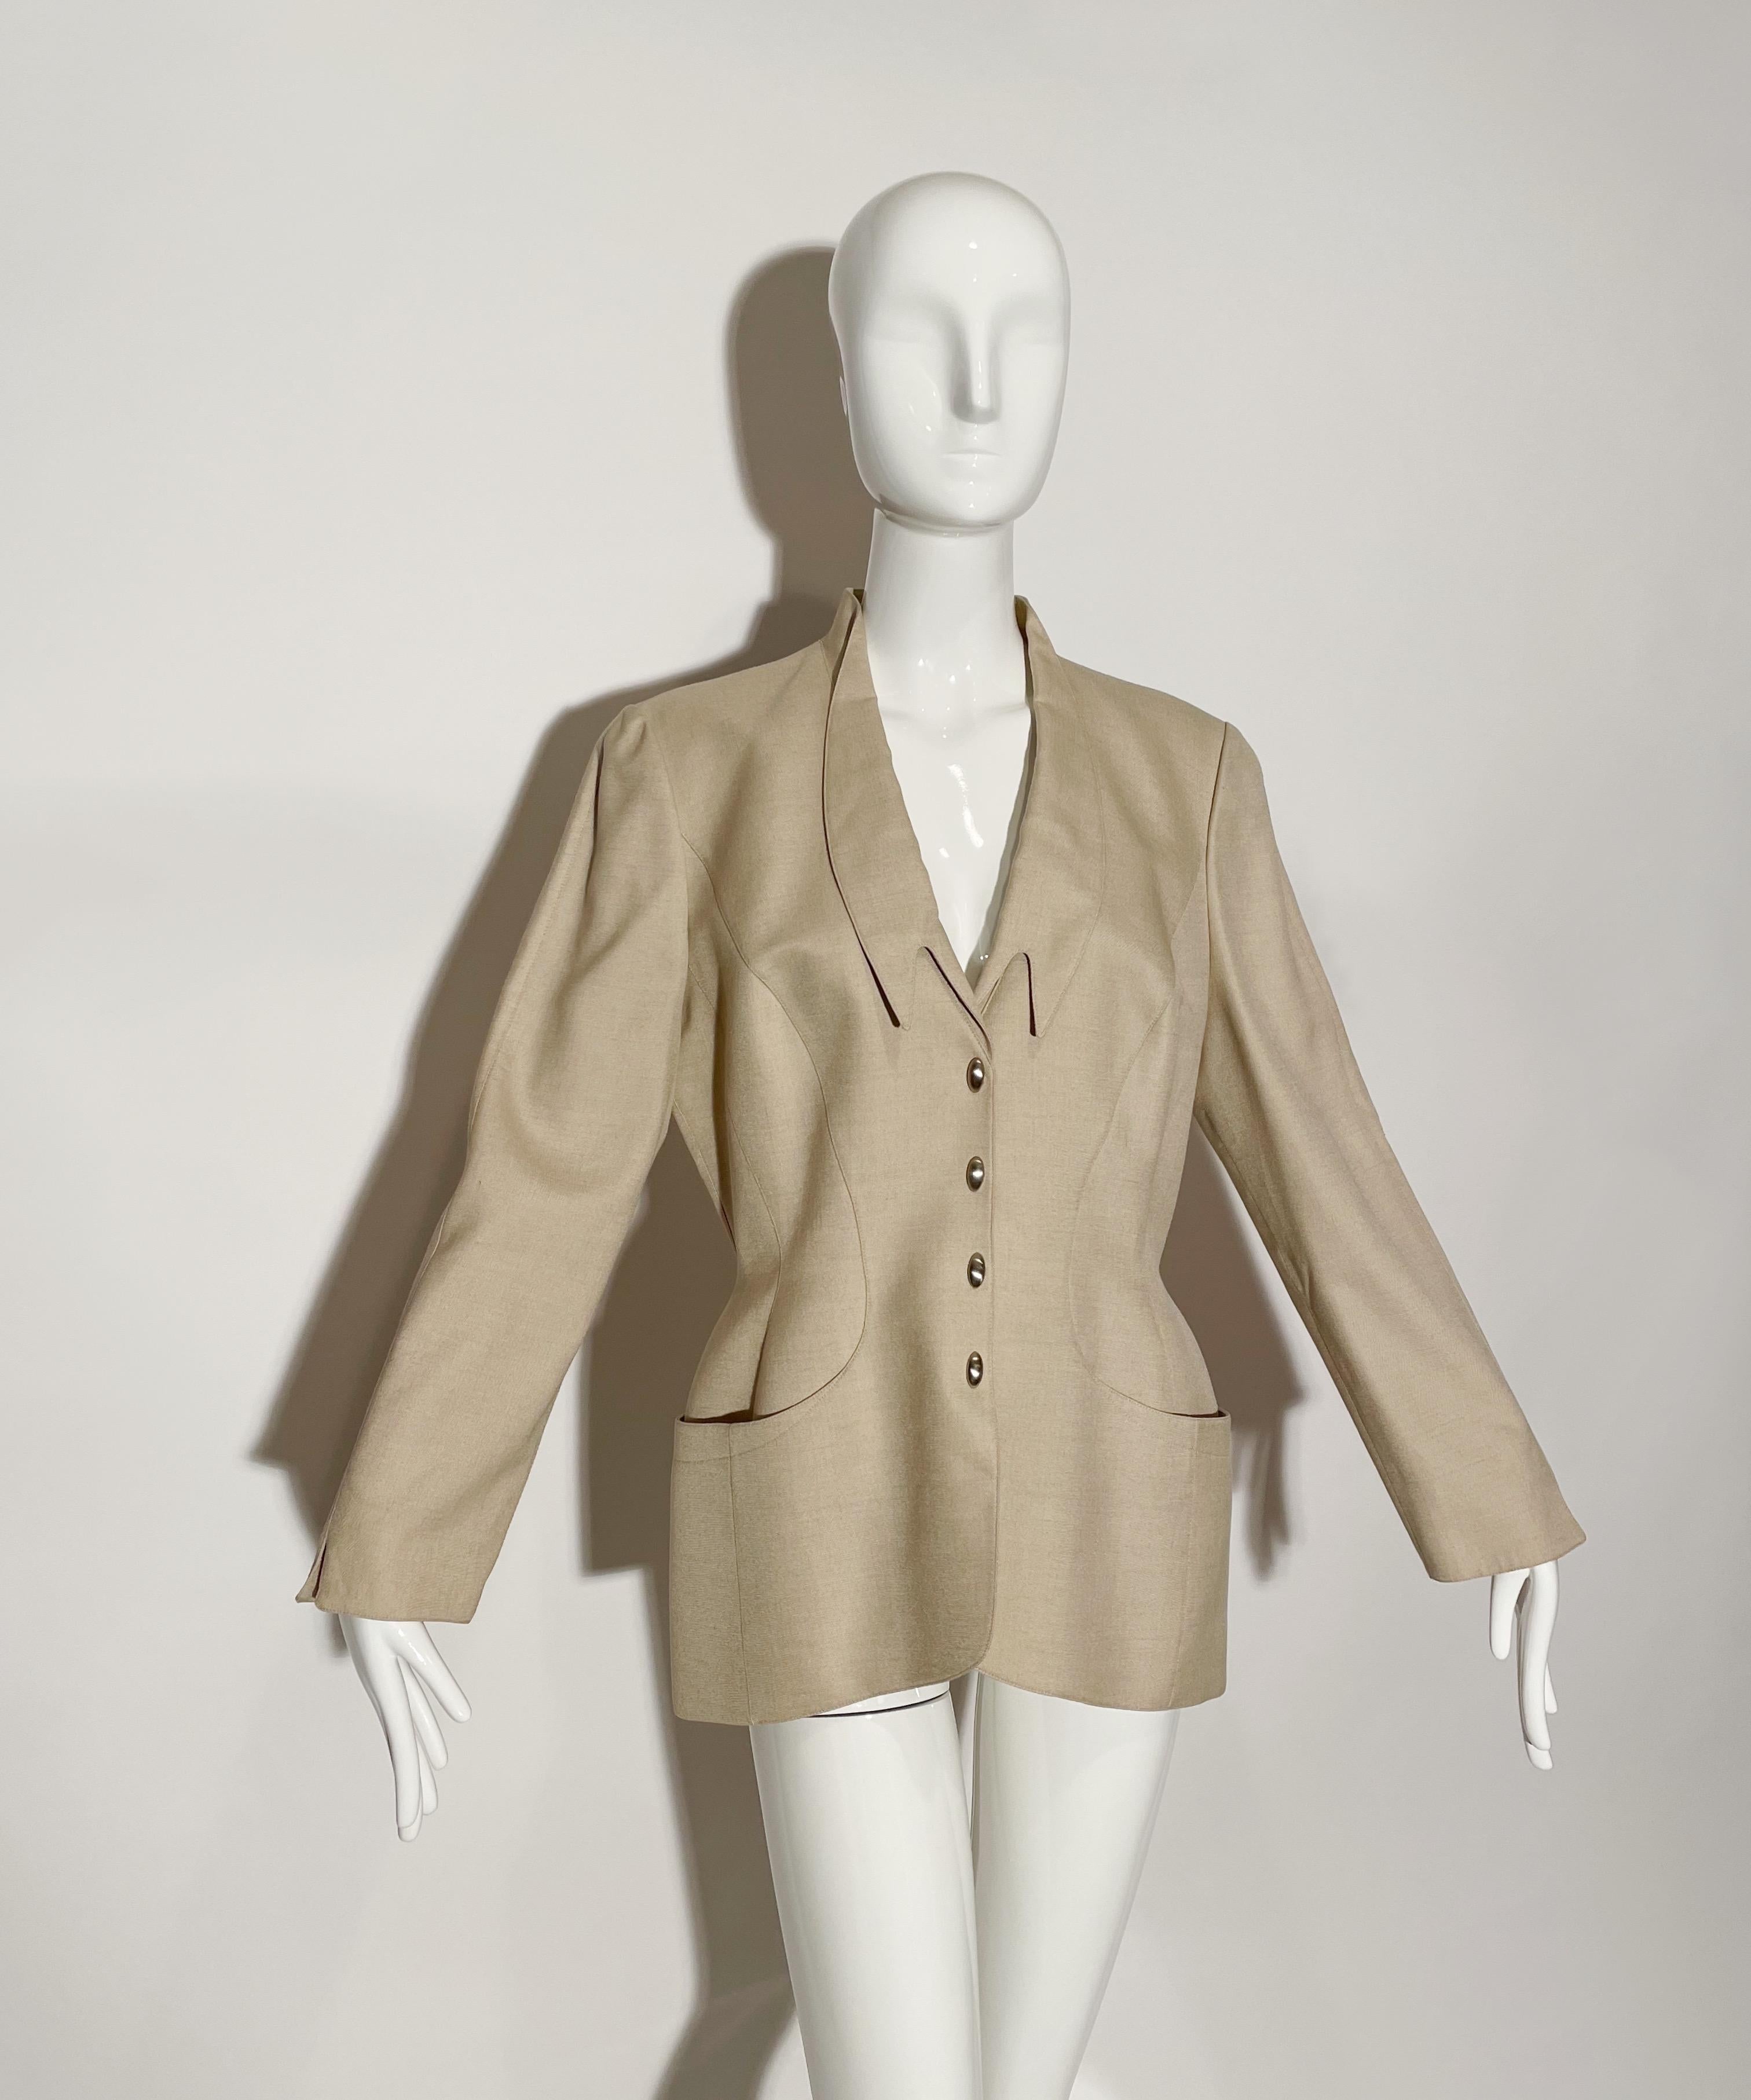 Structural creme blazer. Metal snap button closures. Deep front pockets. Single Breasted. Unique lapel. Lined. Viscose, rayon, and linen. Made in France.

*Condition: excellent vintage condition. No visible flaws.

Measurements Taken Laying Flat